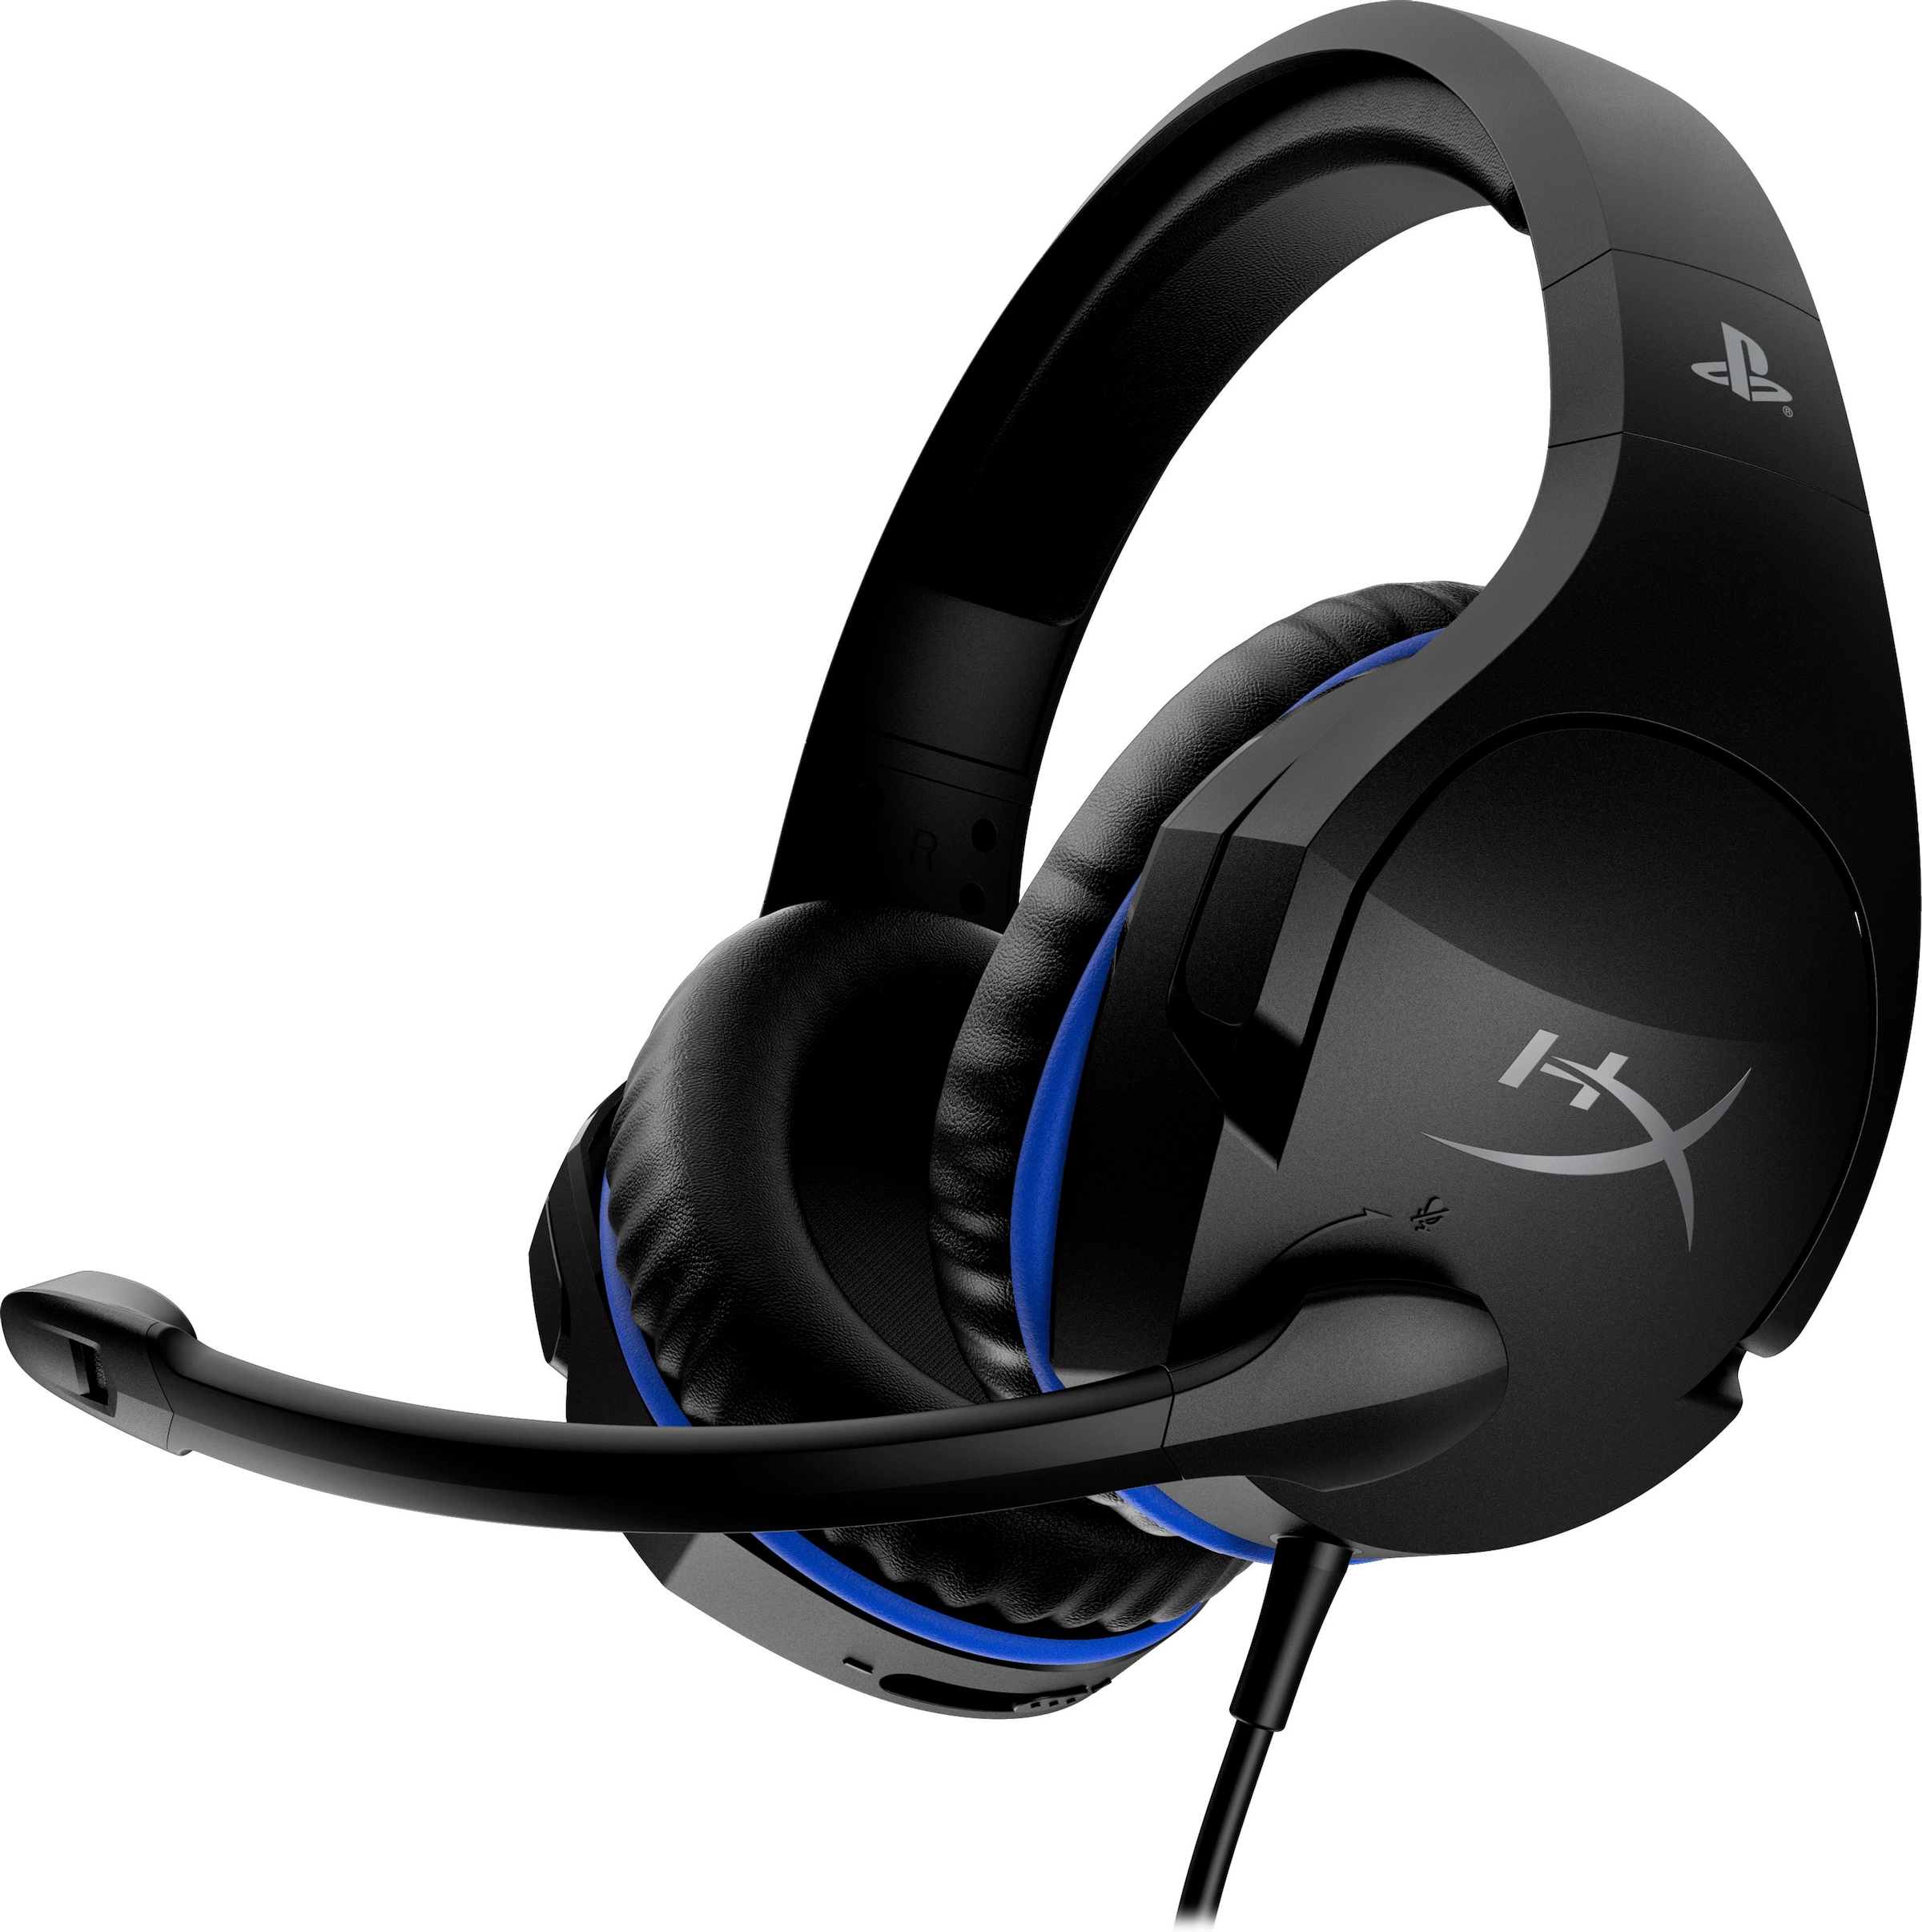 HyperX Gaming-Headset »Cloud Stinger (PS4 bei Mikrofon jetzt abnehmbar Licensed)«, OTTO